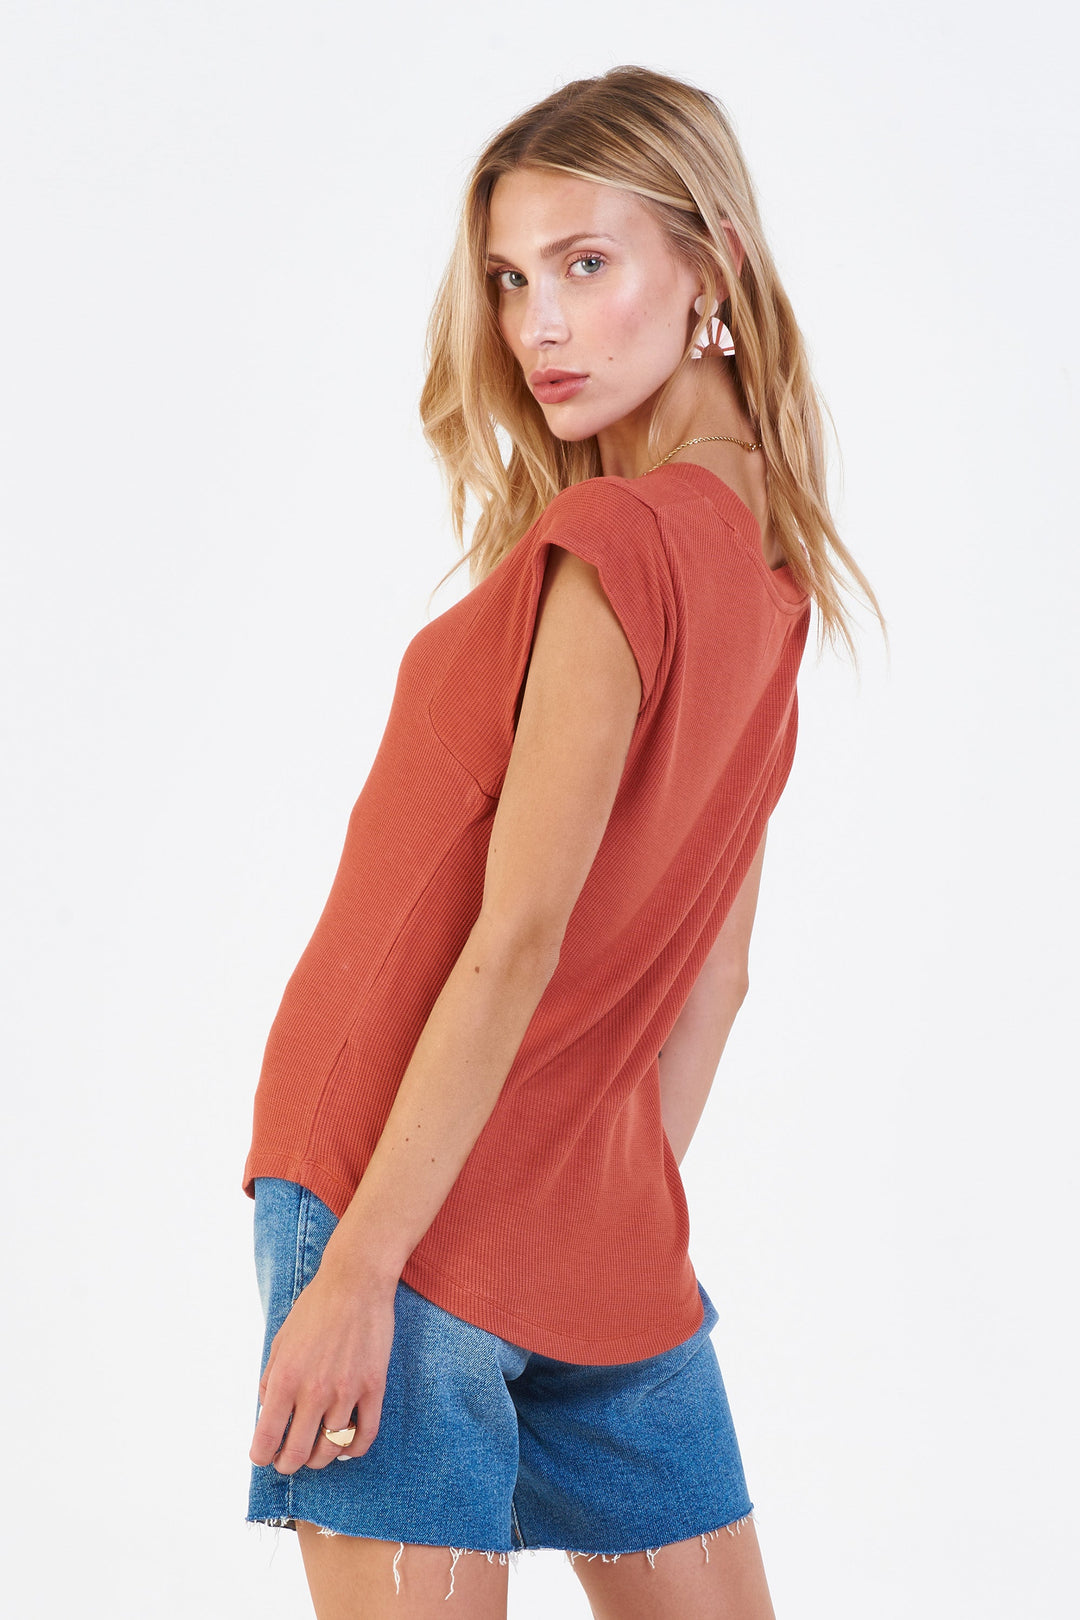 image of a female model wearing a URI THERMAL V-NECK TOP RED CLAY DEAR JOHN DENIM 